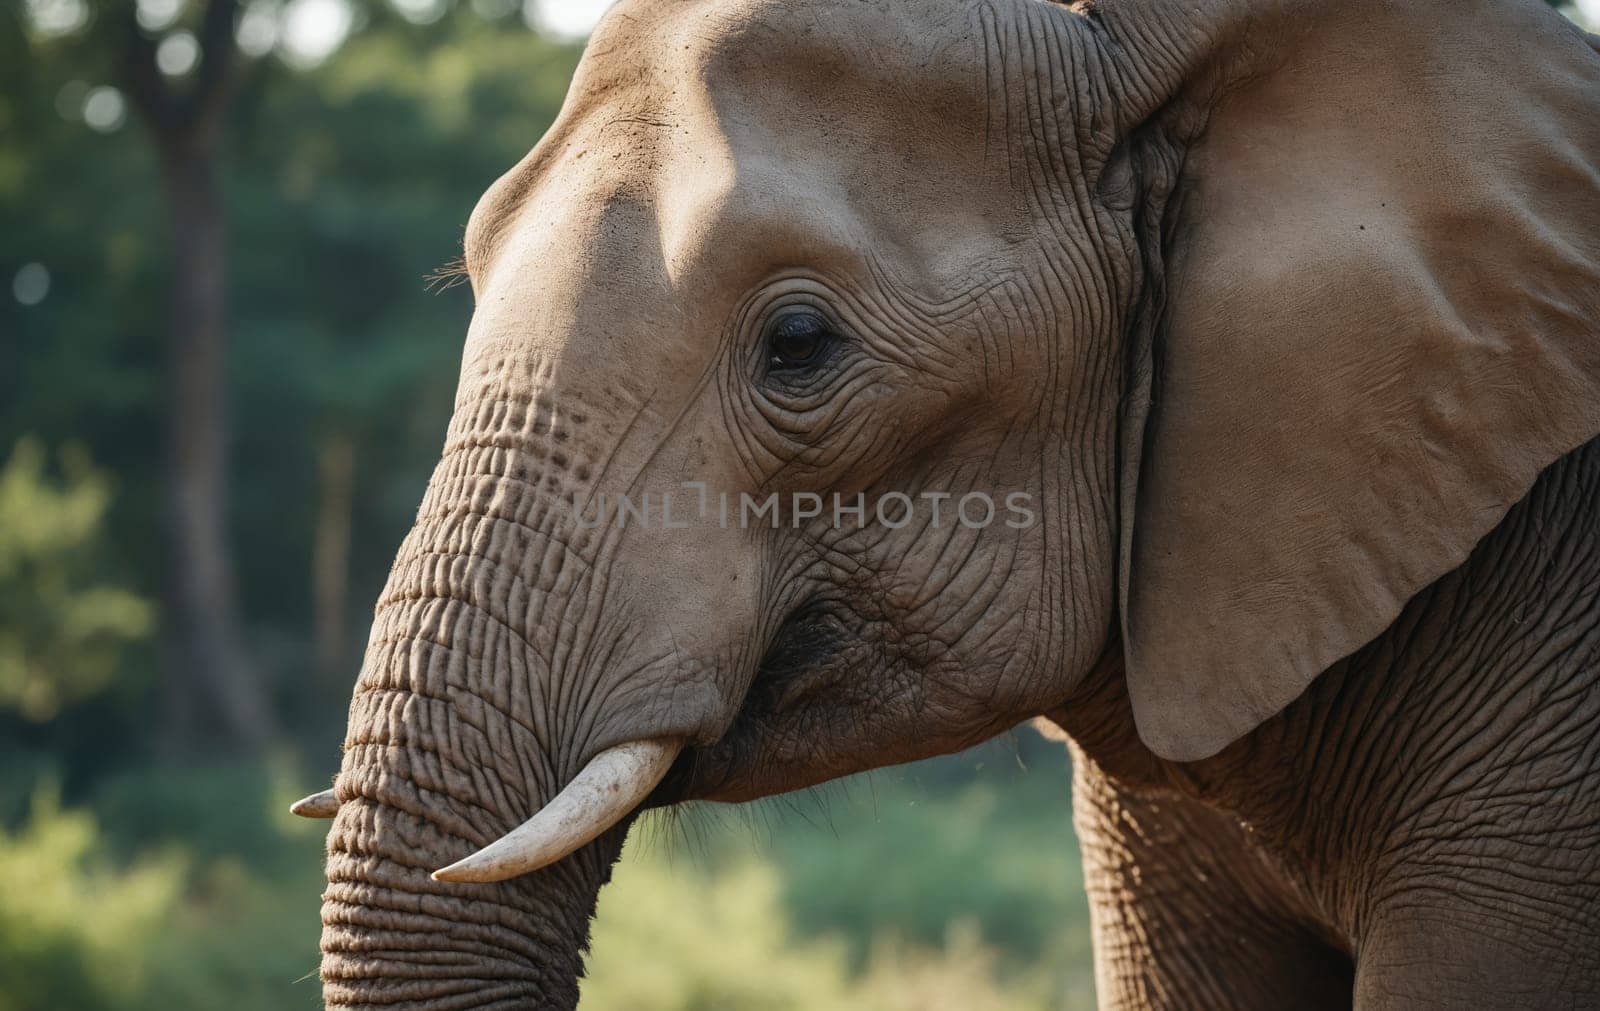 Close up of an Indian elephants wrinkled snout with trees in the background by Andre1ns